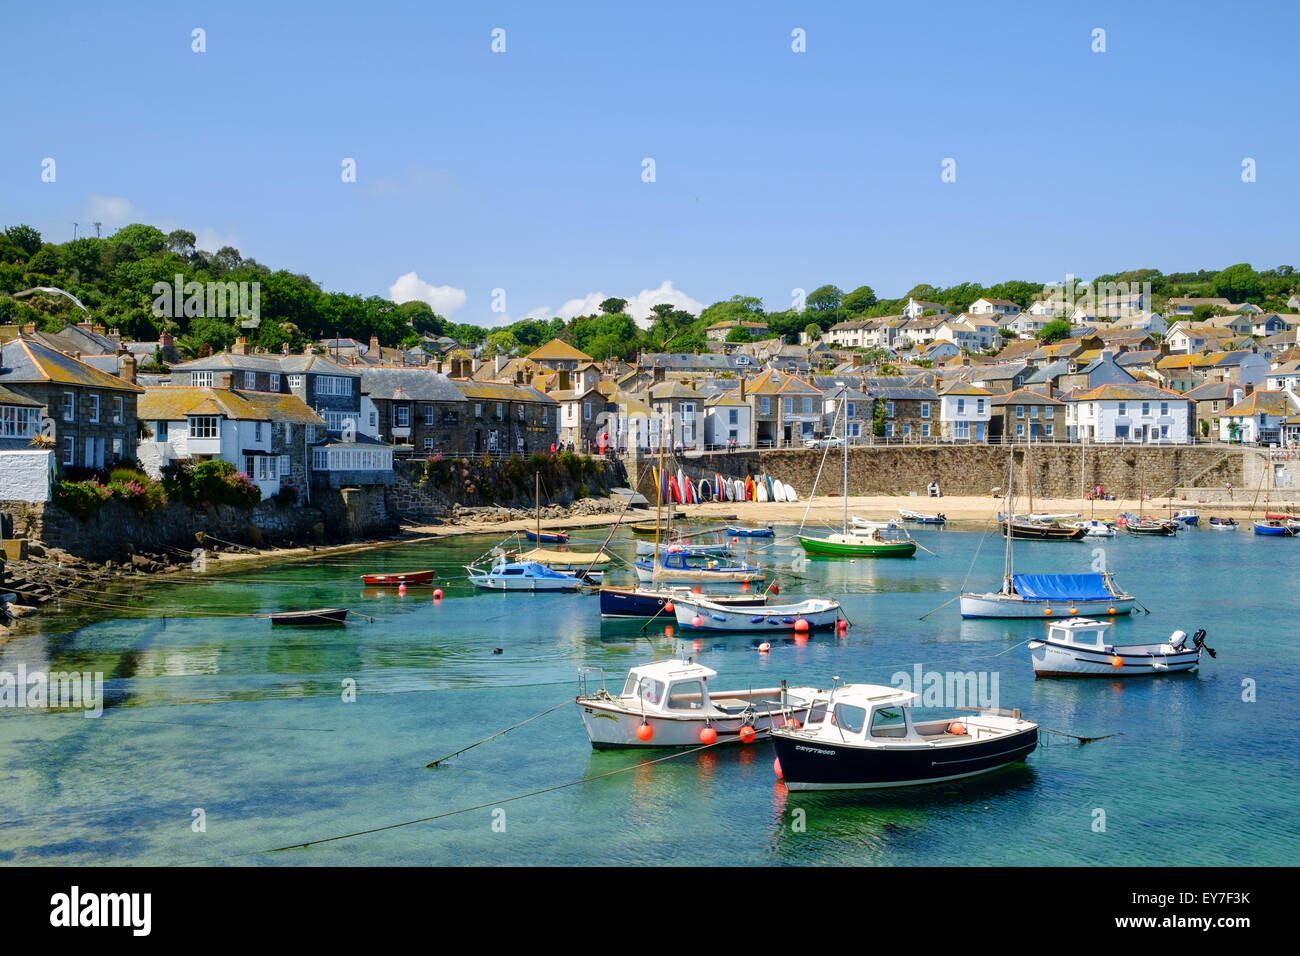 Old fishing village of Mousehole with fishing boats in the harbor, West Cornwall, England, UK Stock Photo